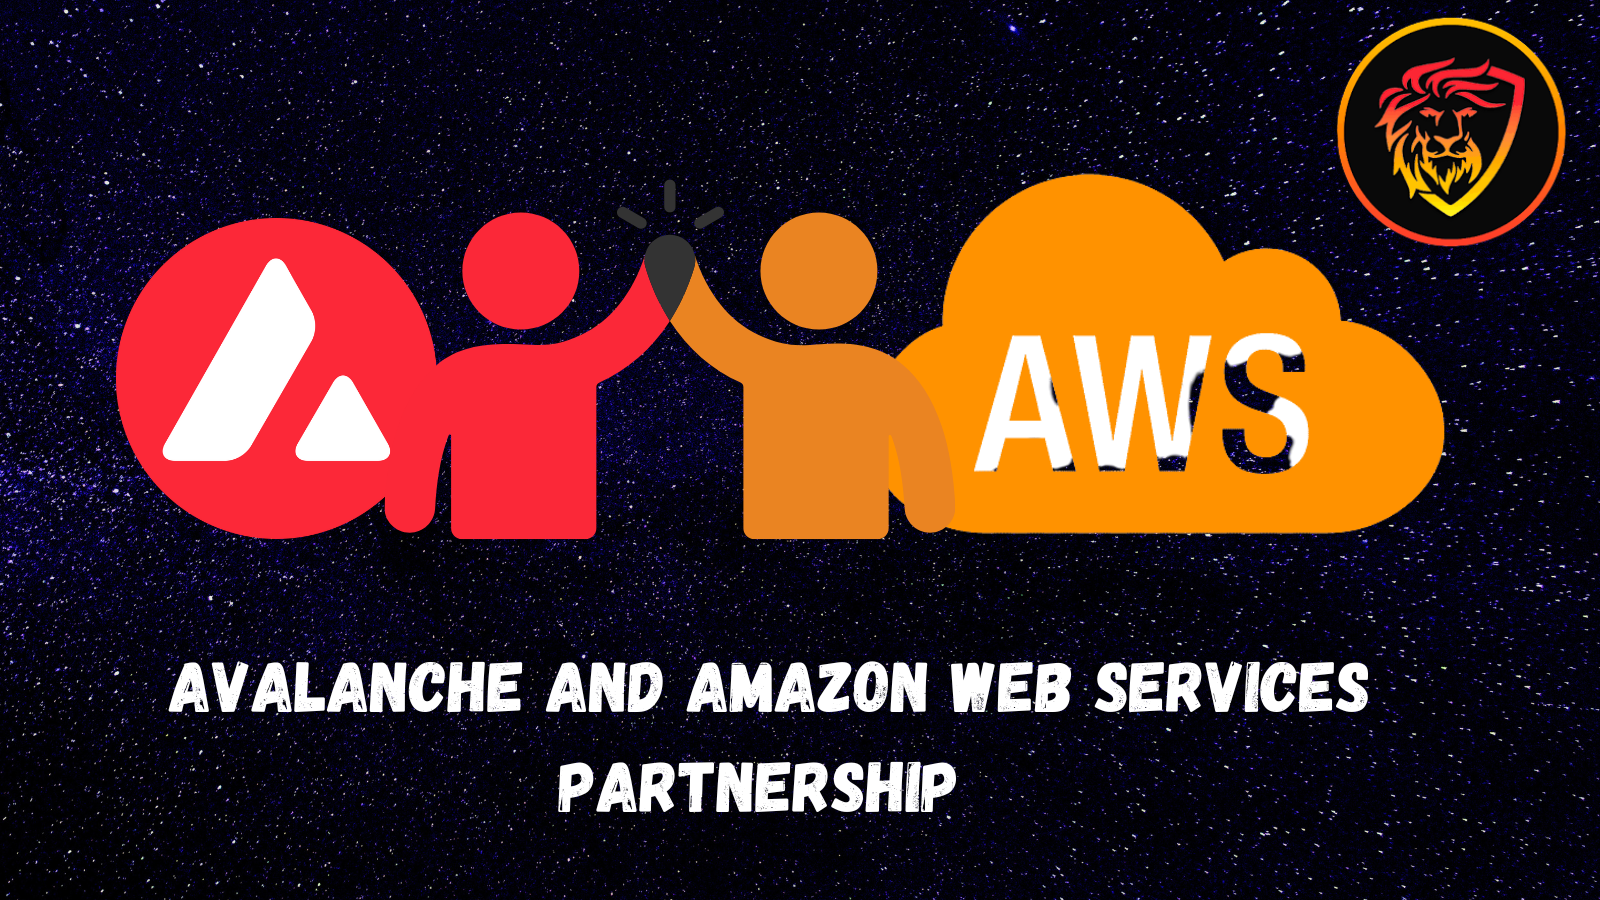 avalanche and aws partnership.png